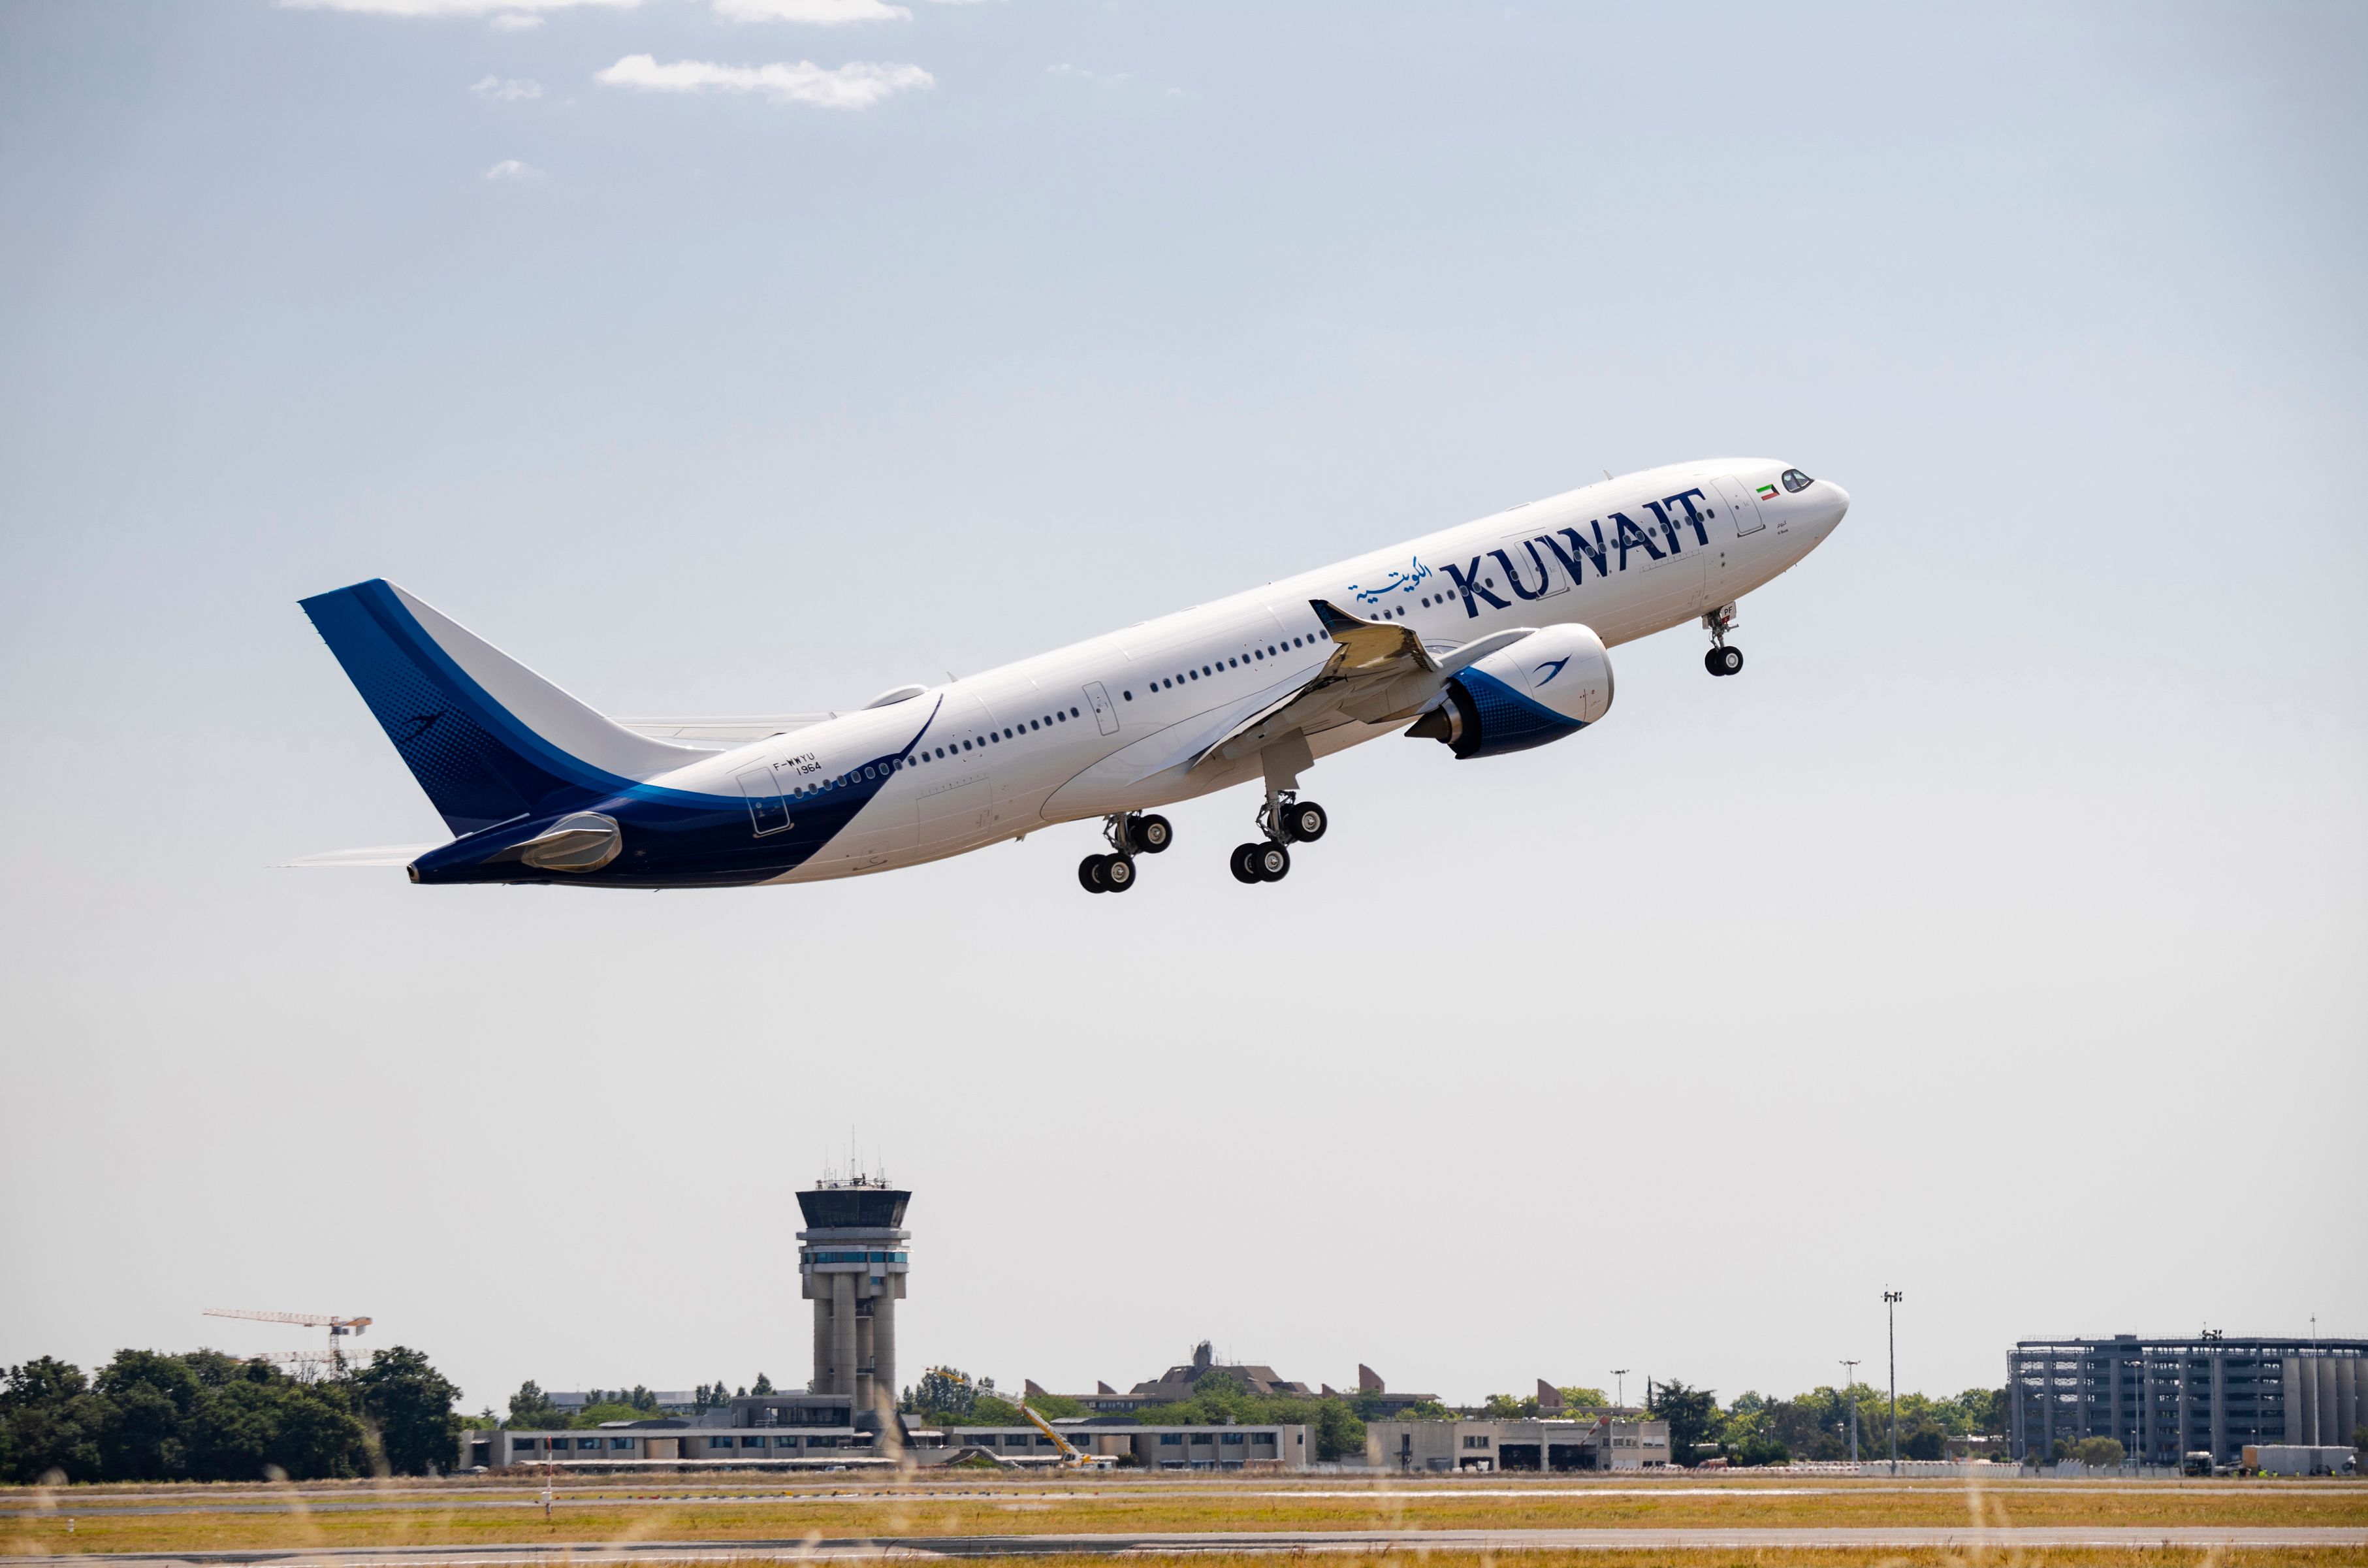 A Kuwait Airways A330neo aircraft taking off.